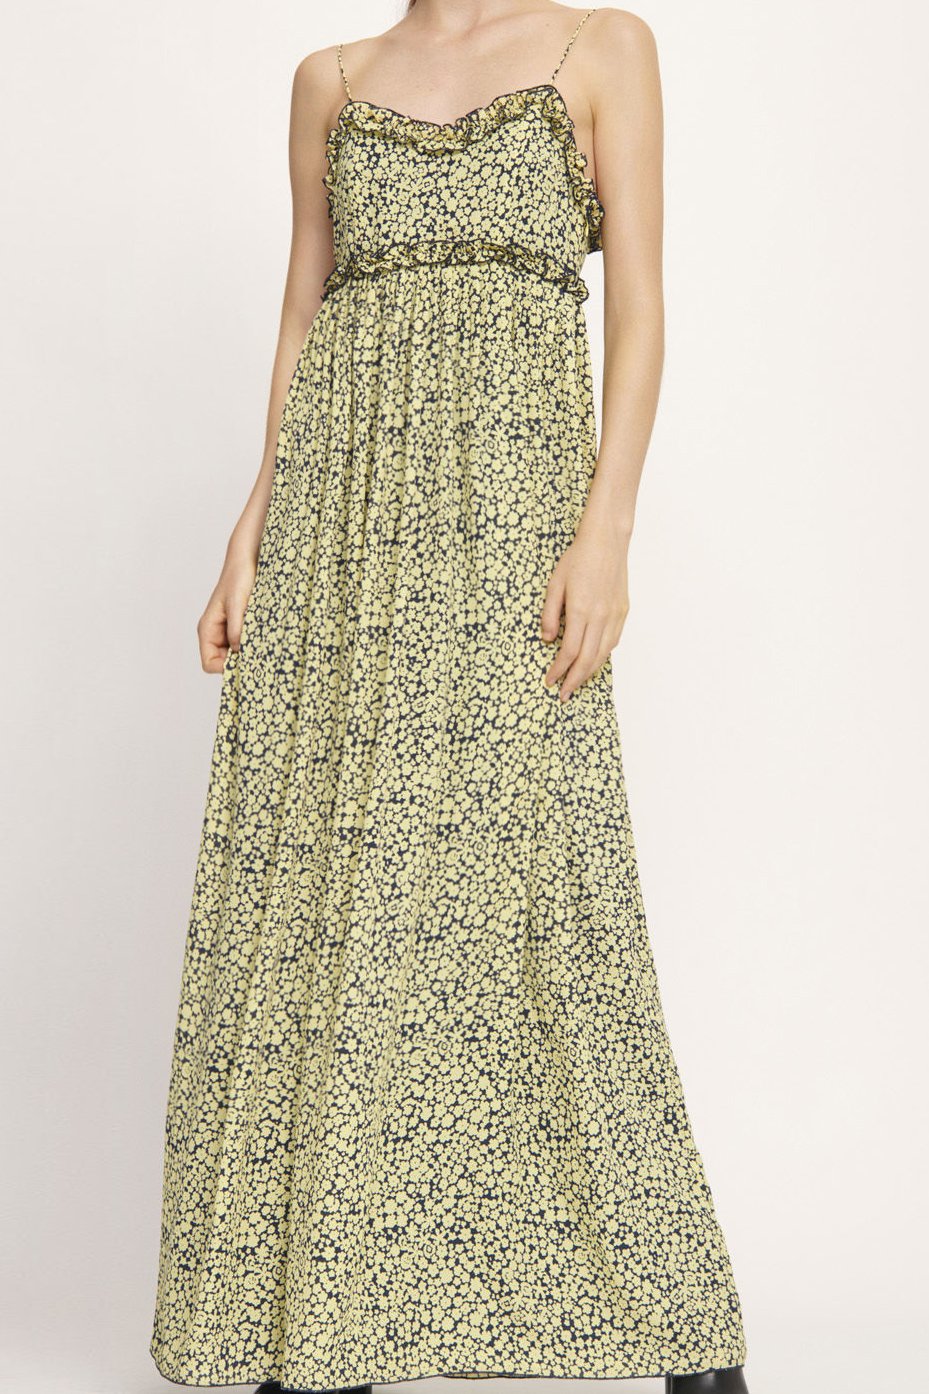 YELLOW AND NAVY FLORAL PRINT SPAGHETTI STRAP MAXI DRESS